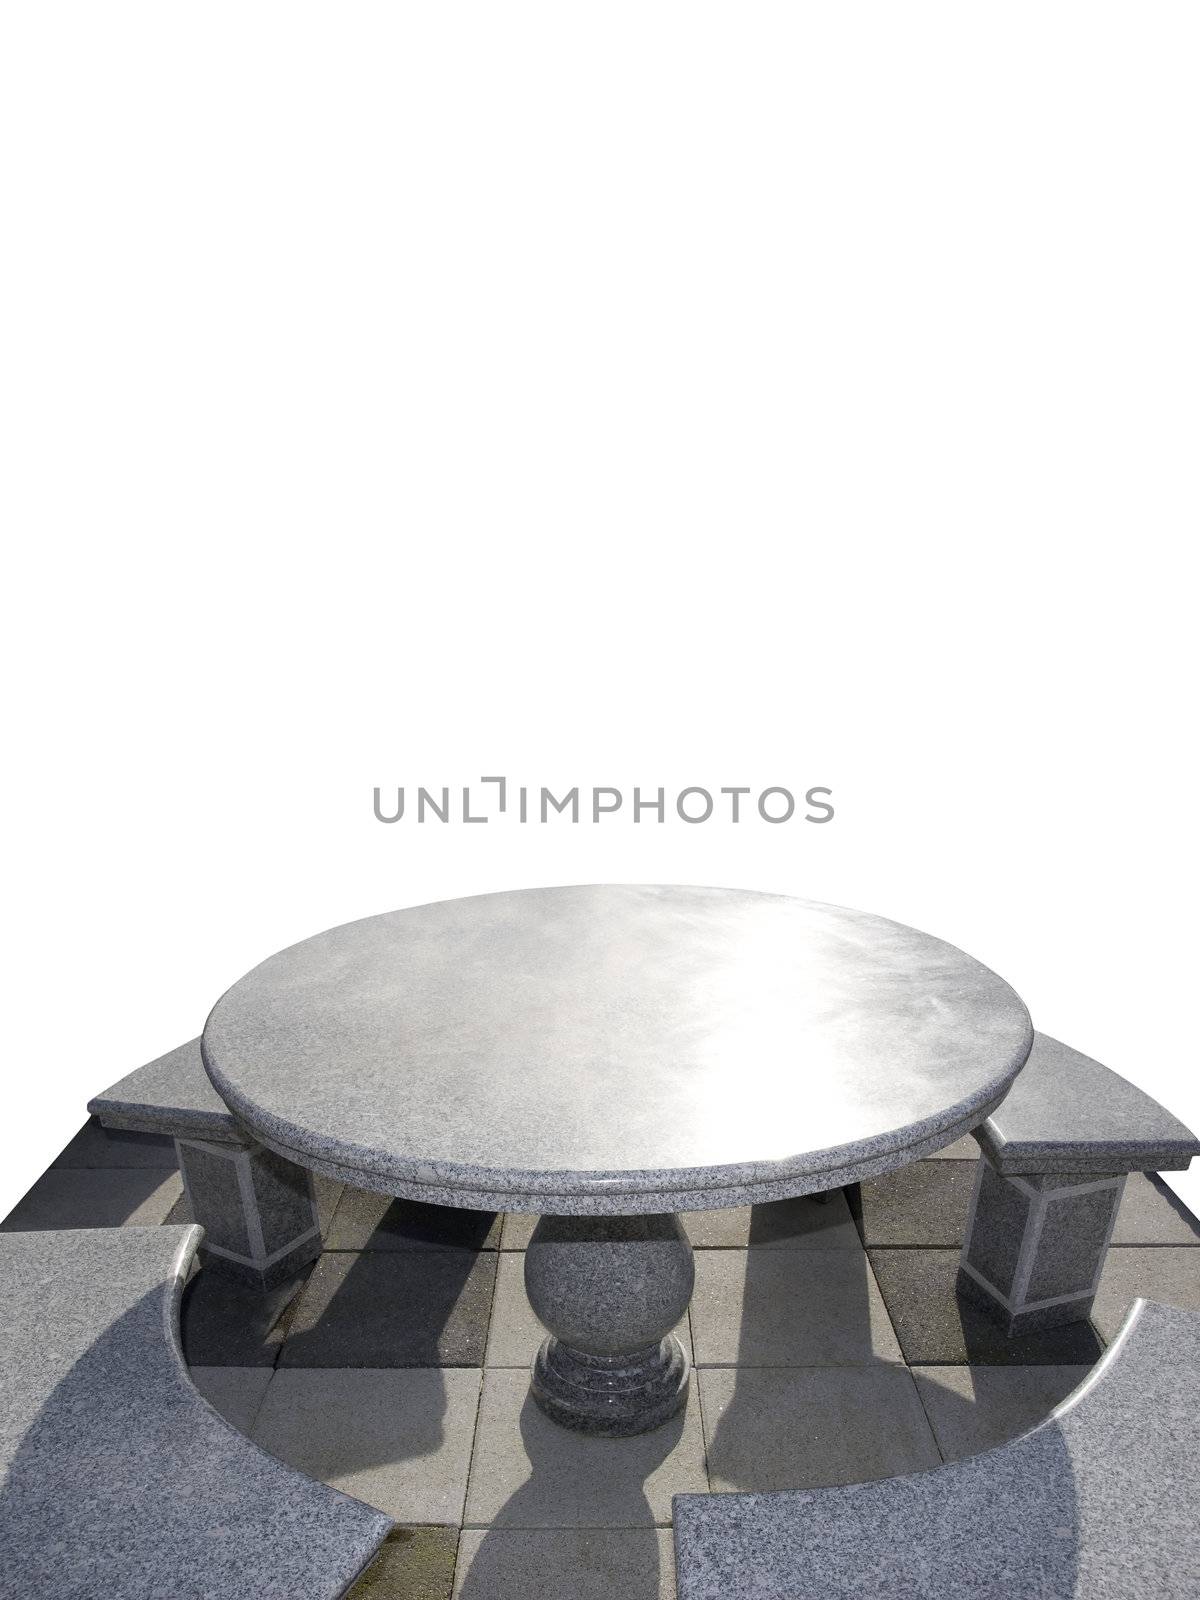 large marble table and chairs by morrbyte